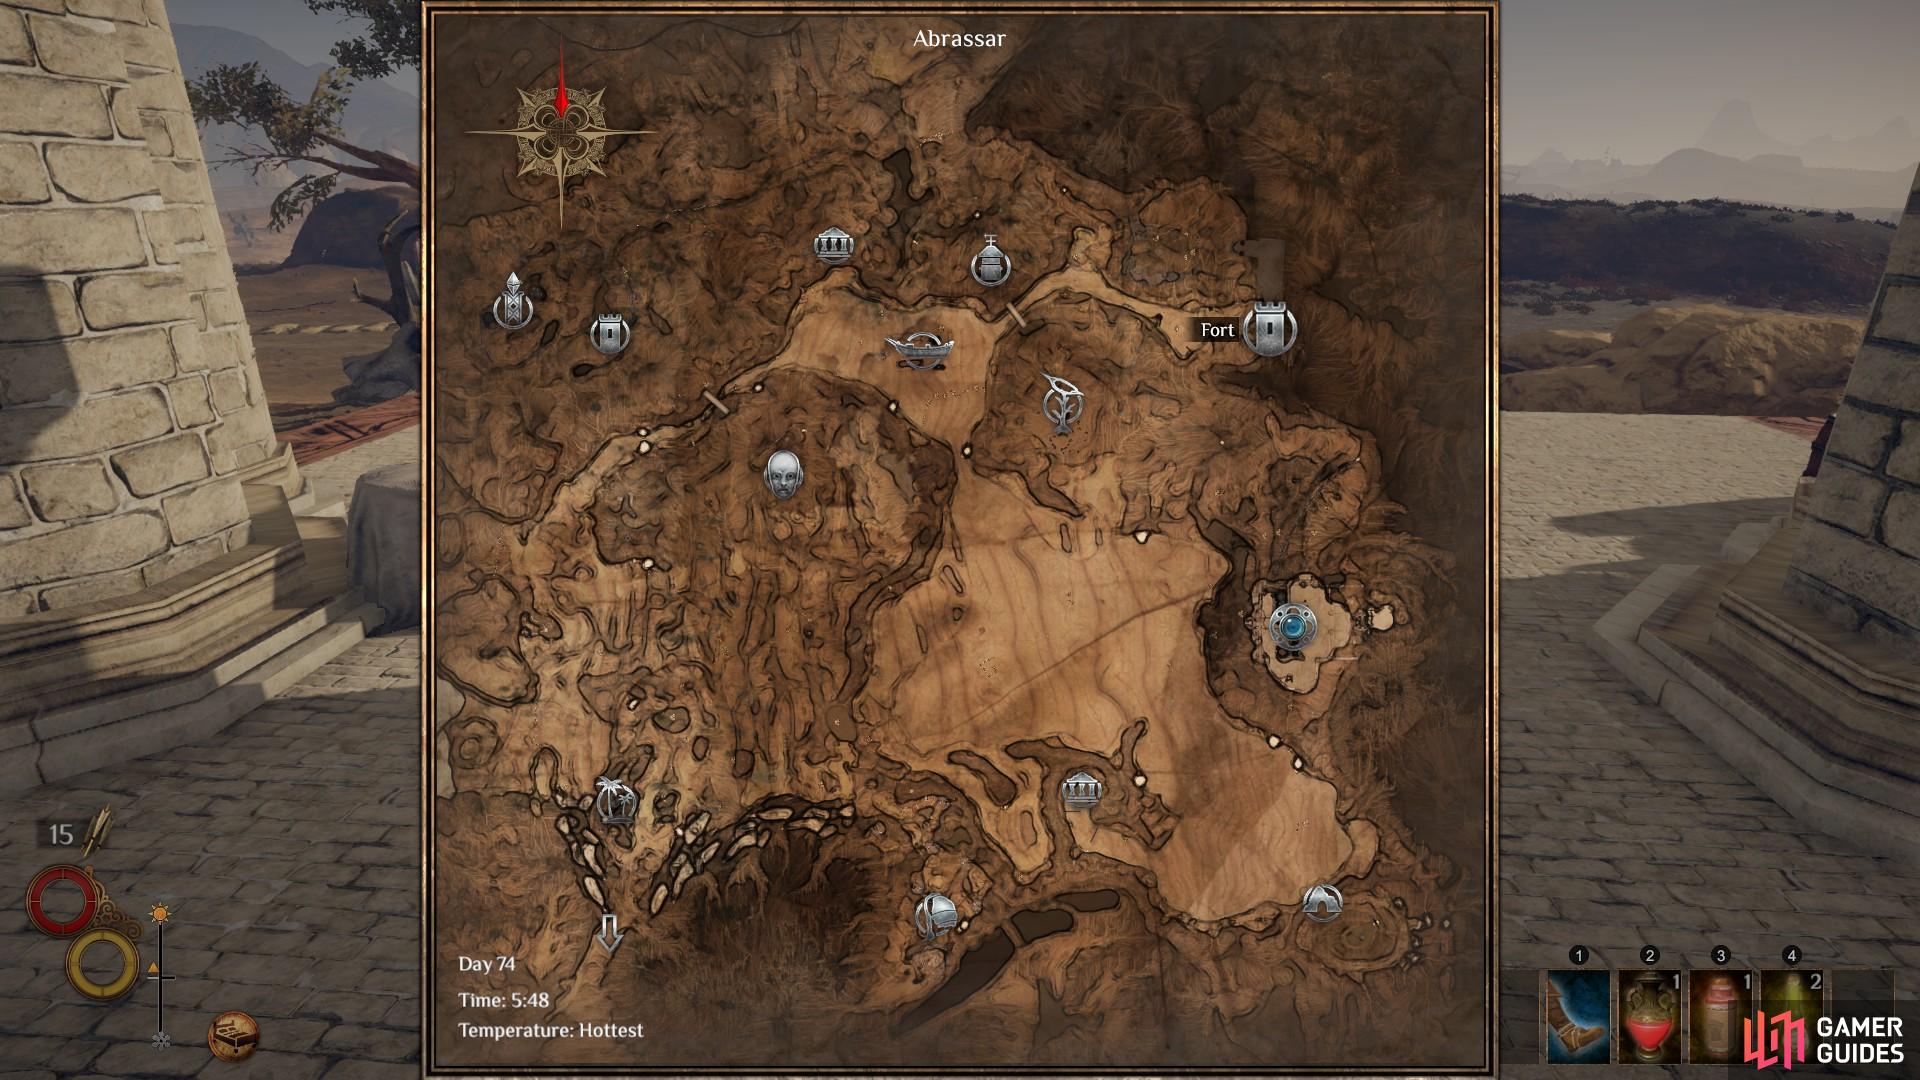 The location of Electric Lab on the Abrassar map, marked here as 'Fort' in the north east of the map.